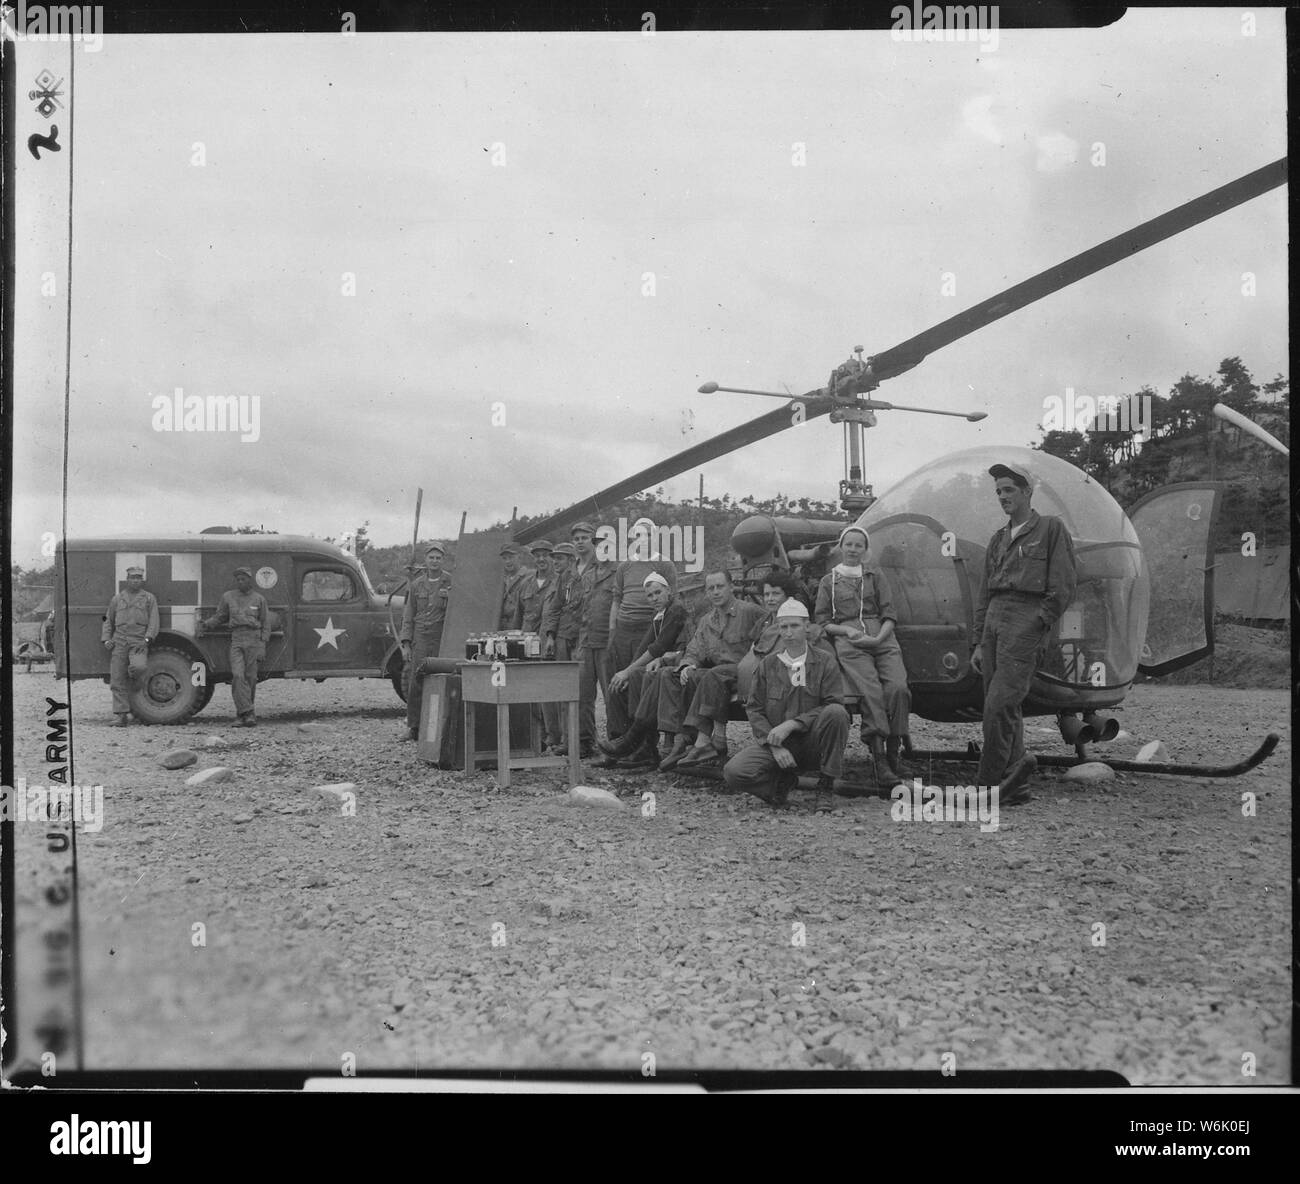 Personnel and equipment needed to save a man's life are assembled at HQs of the 8225th Mobile Army Surgical Hospital, Korea.; General notes:  Use War and Conflict Number 1457 when ordering a reproduction or requesting information about this image. Stock Photo